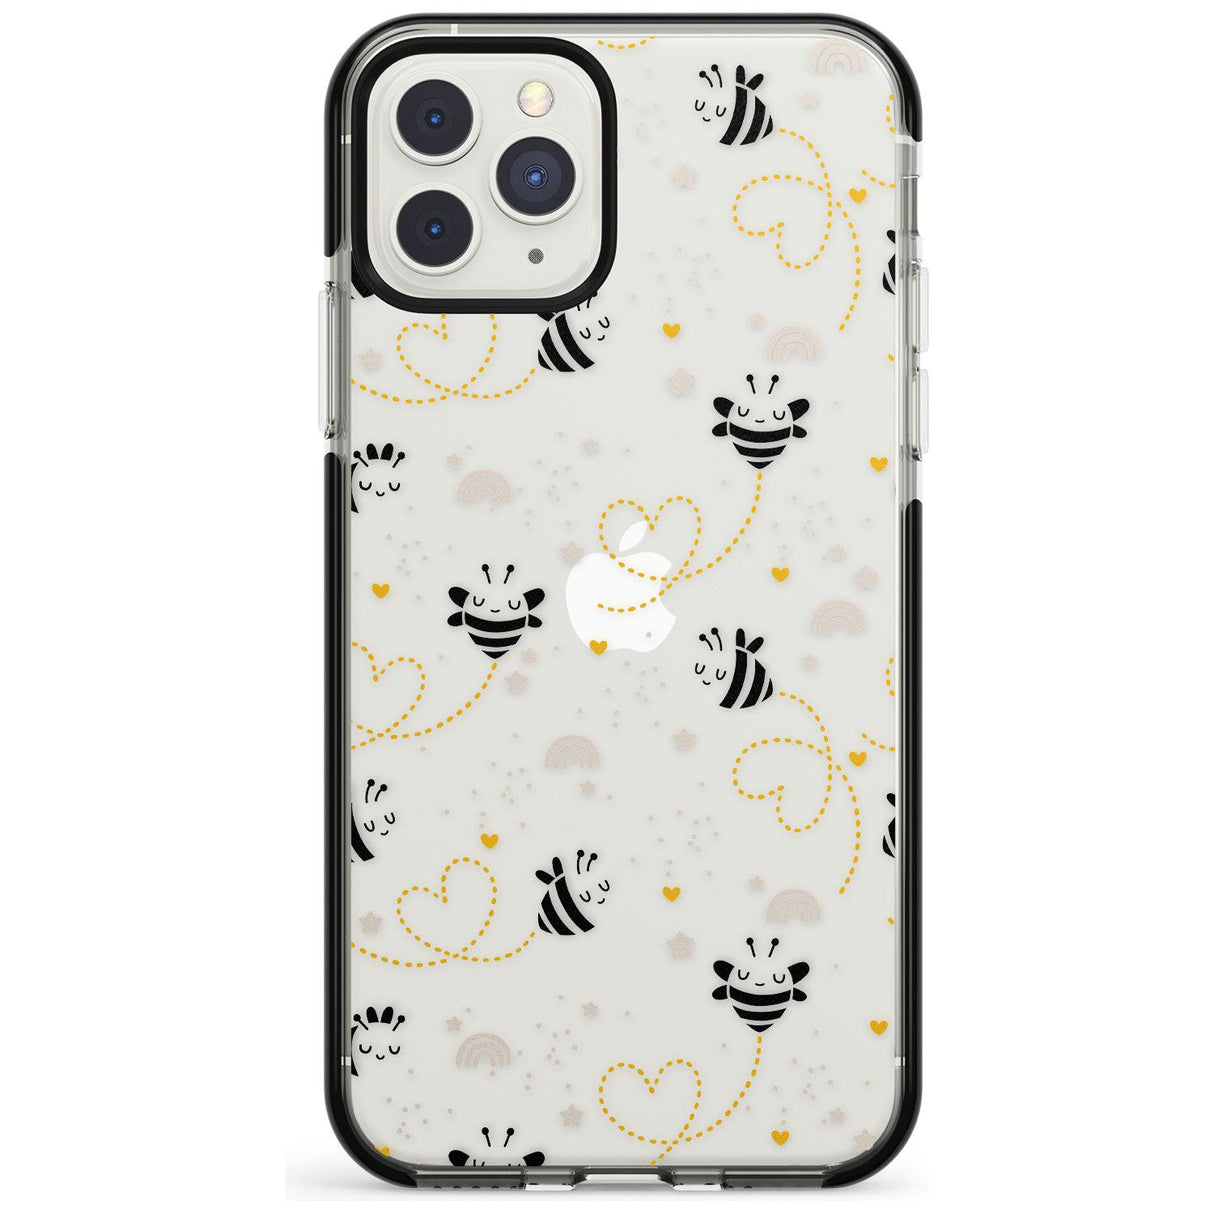 Sweet as Honey Patterns: Bees & Hearts (Clear) Black Impact Phone Case for iPhone 11 Pro Max